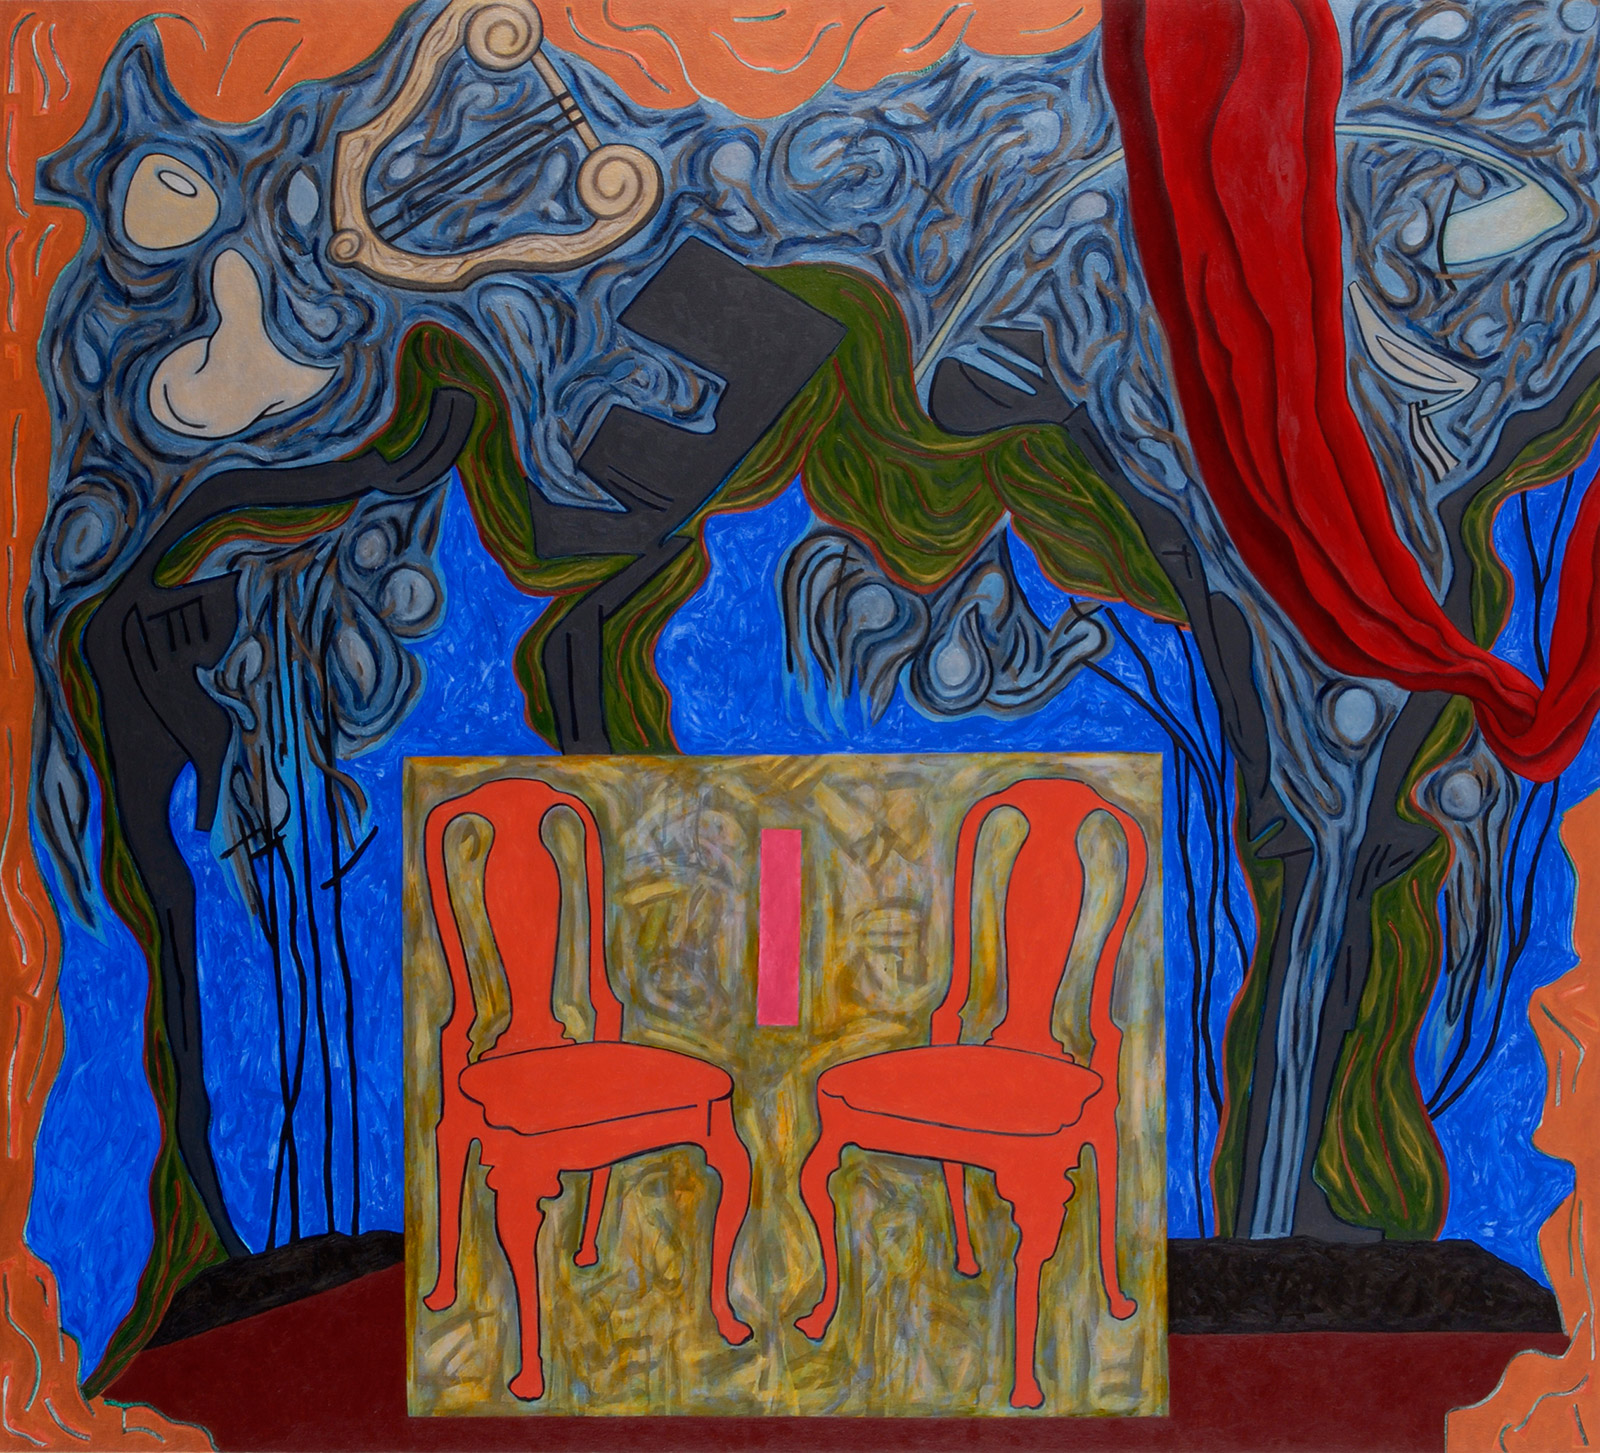 Nightfall, 2004 | 60” x 66” | Oil & Acrylic on Canvas | Collection of Lee & Sophie Dichter, New York